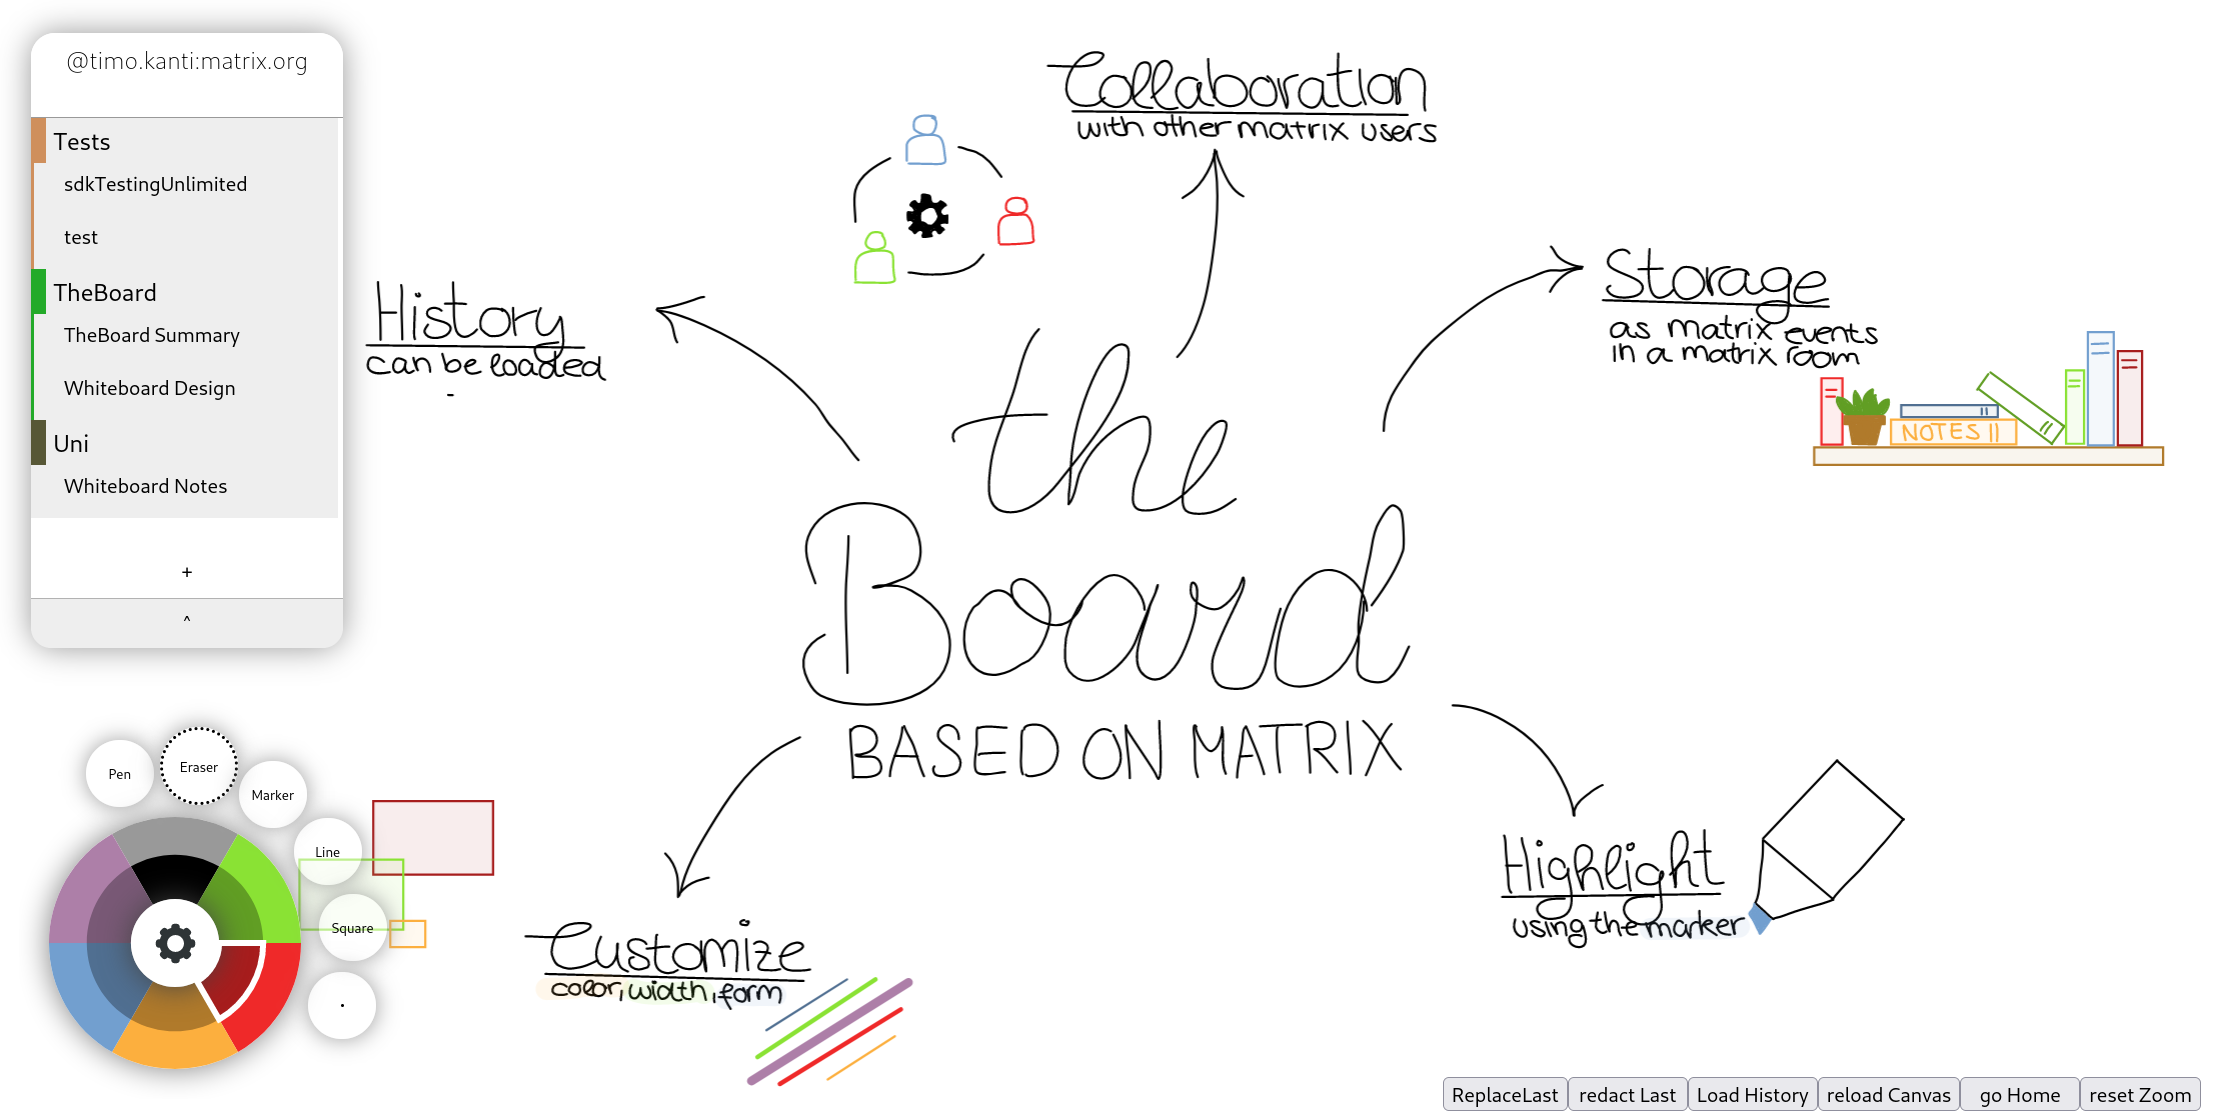 theboard - matrix, anders gedacht.